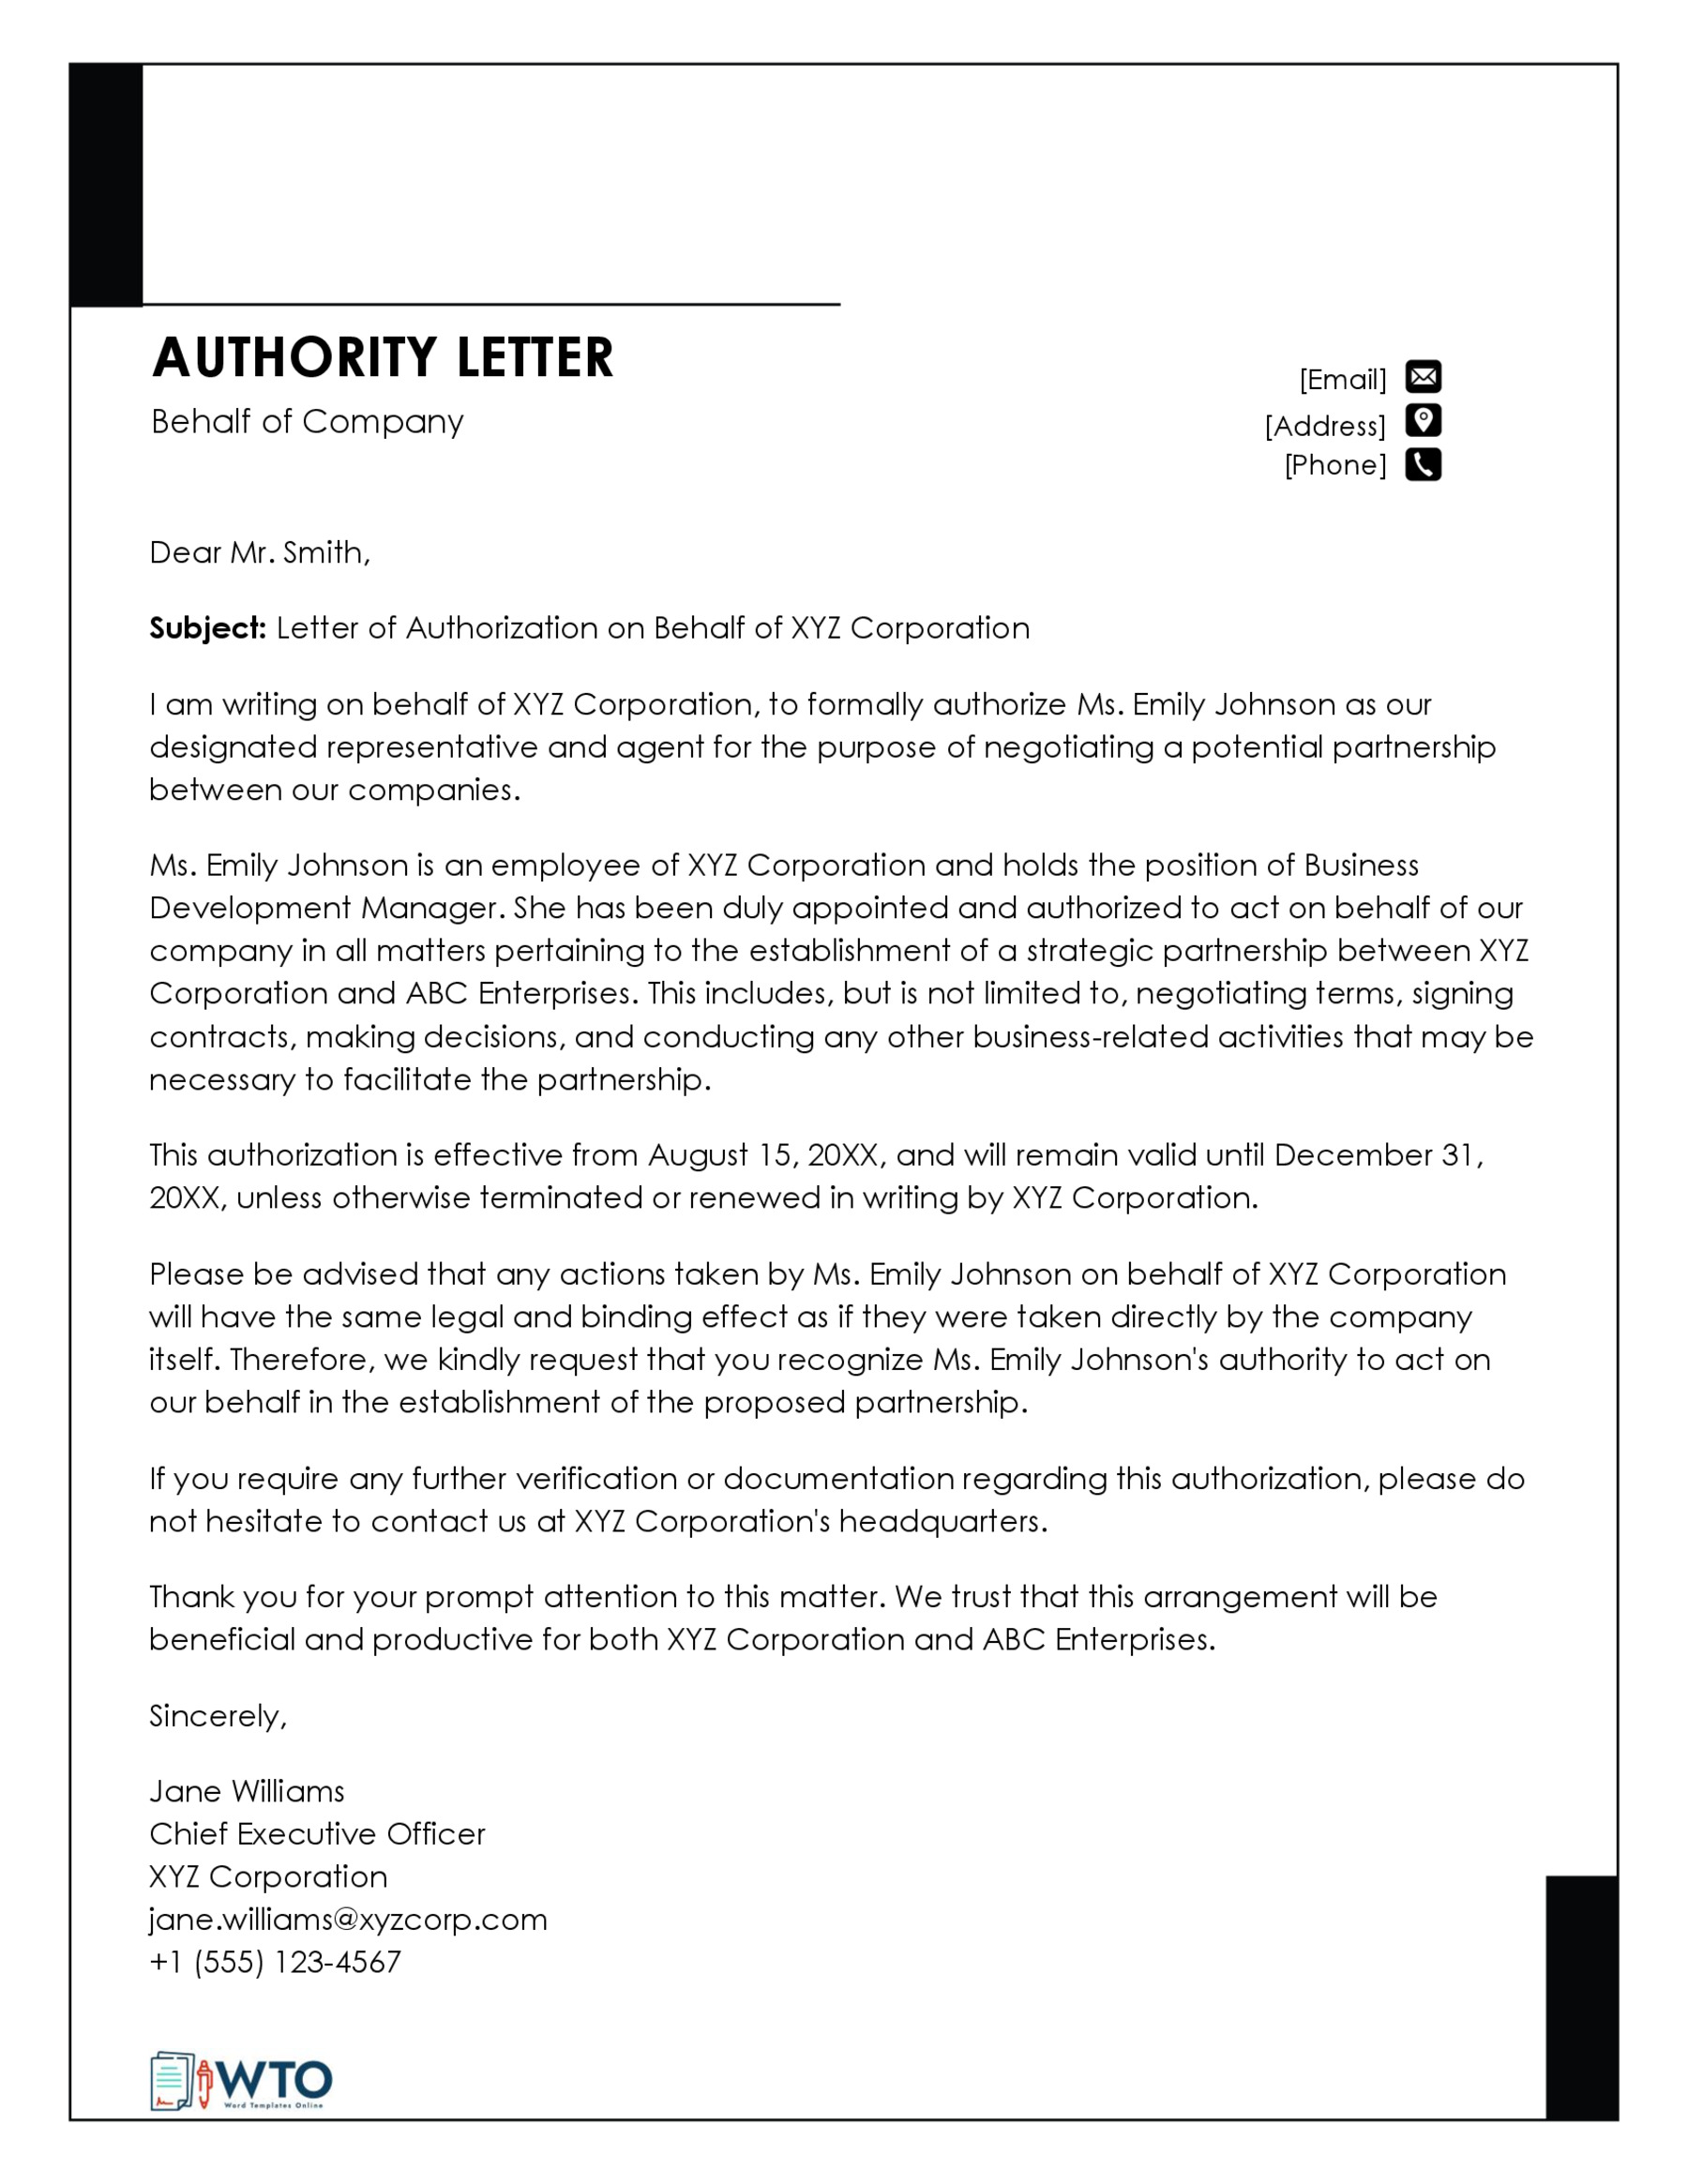 Letter of Behalf of a Company Sample Free download